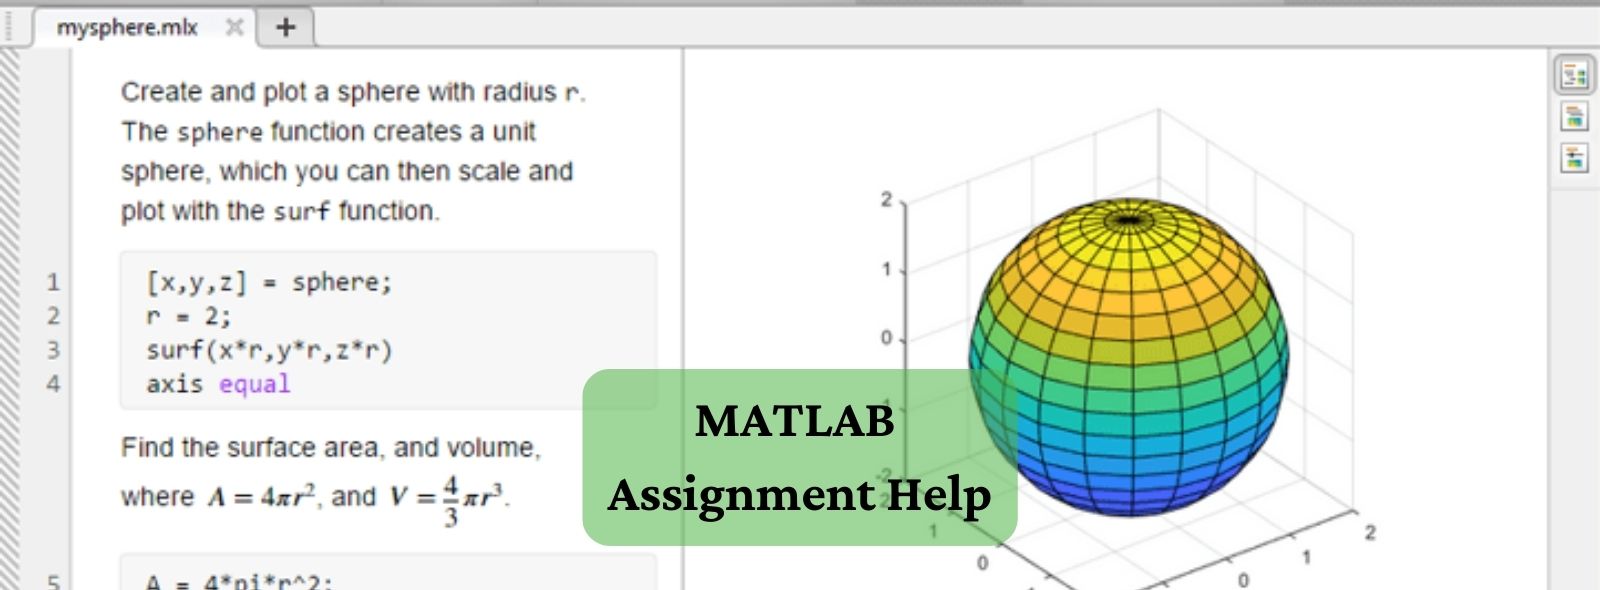 Image Processing in MATLAB Assignment Help (Image Processing Assignment Help with MATLAB)